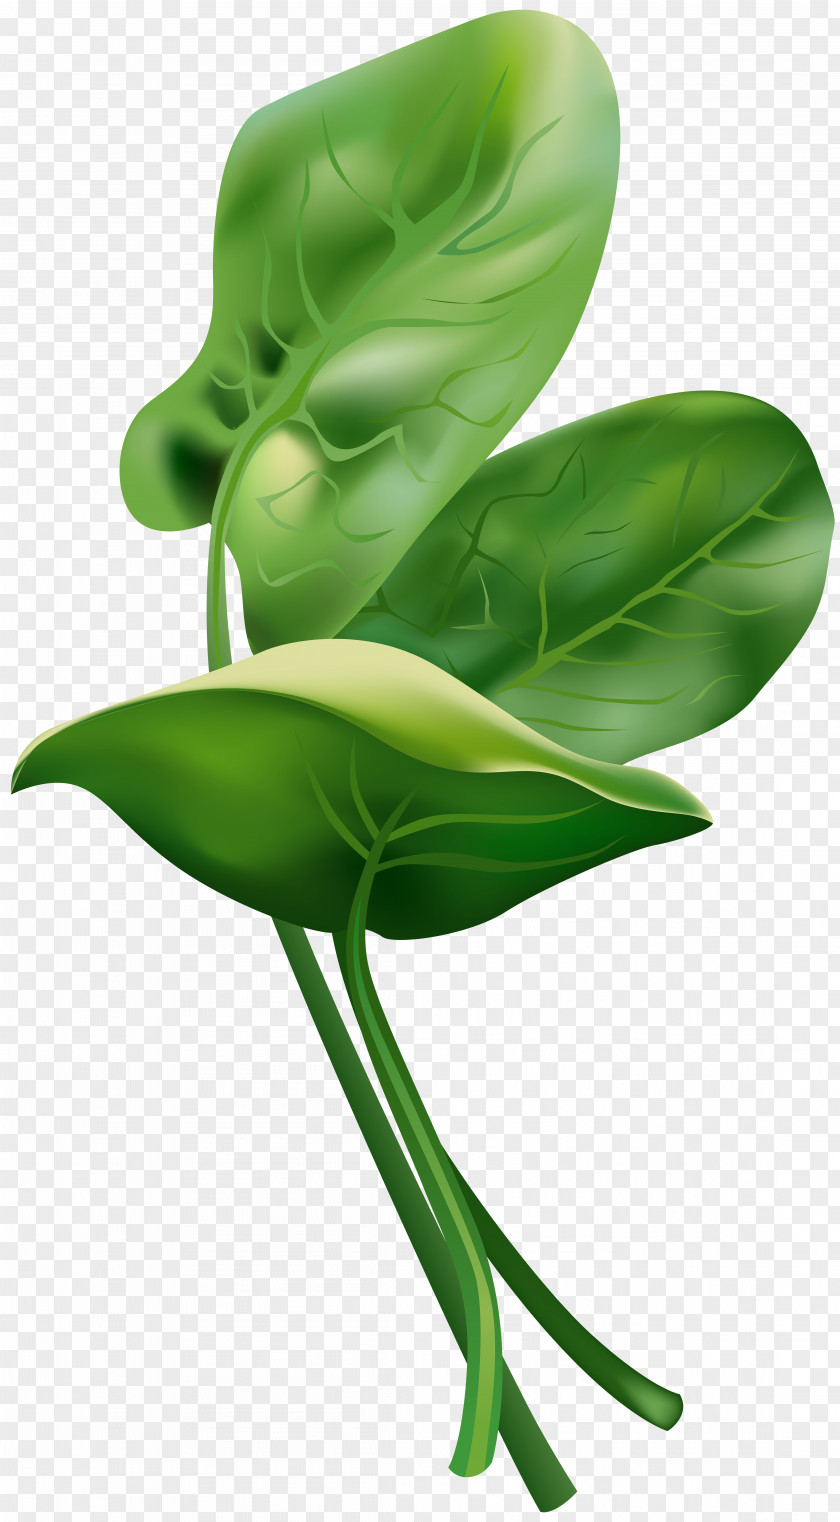 Spinach Free Clip Art Image PNG